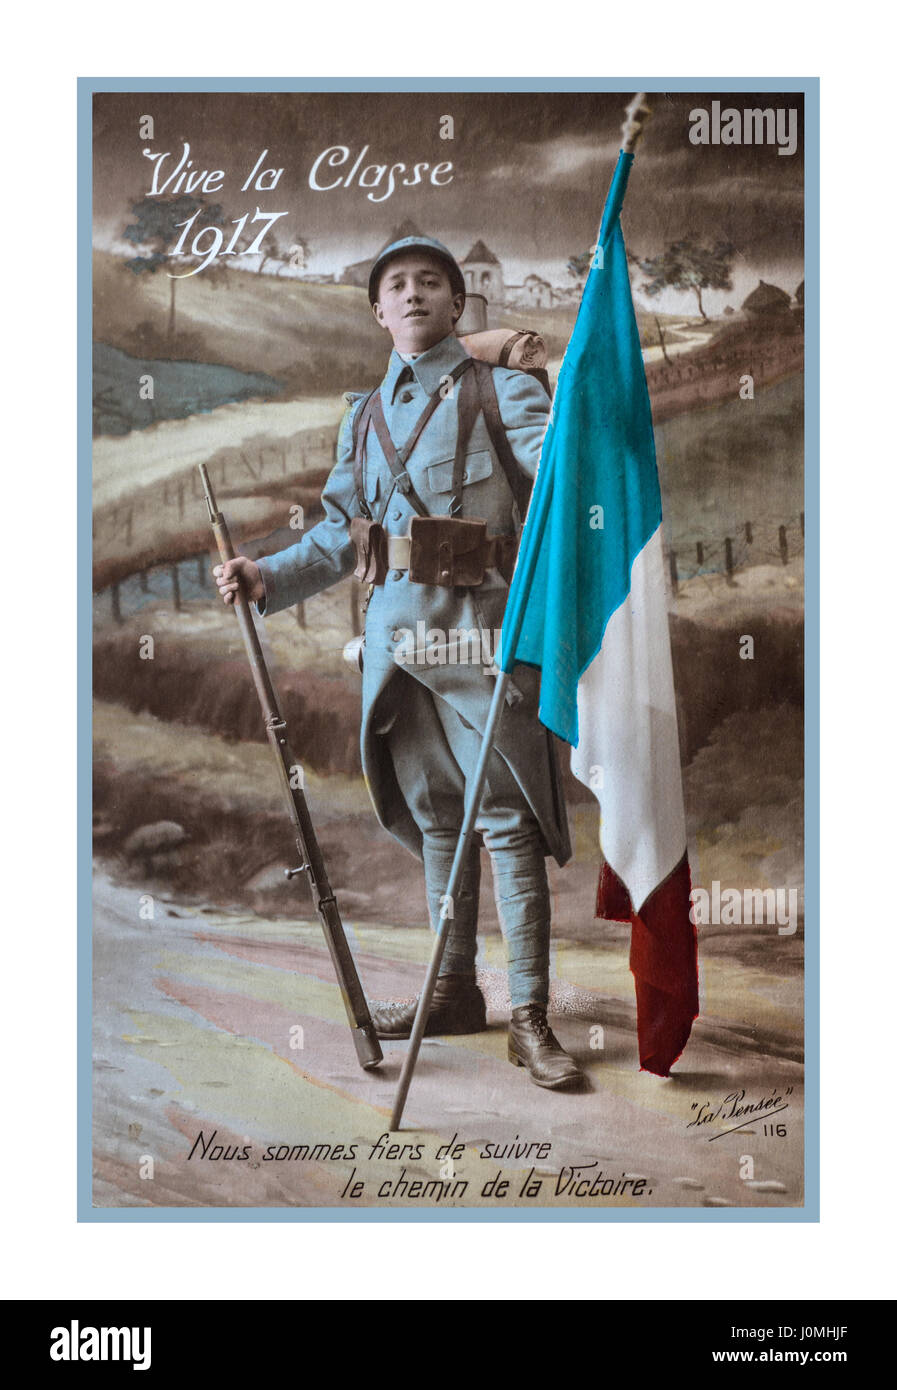 WW1 1914-1918 propaganda postcard with French infantry soldier holding tricolor flag dated 1917 from the battlefront in France, ‘long live the class of 1917...We are proud to follow the path of victory..’ Stock Photo